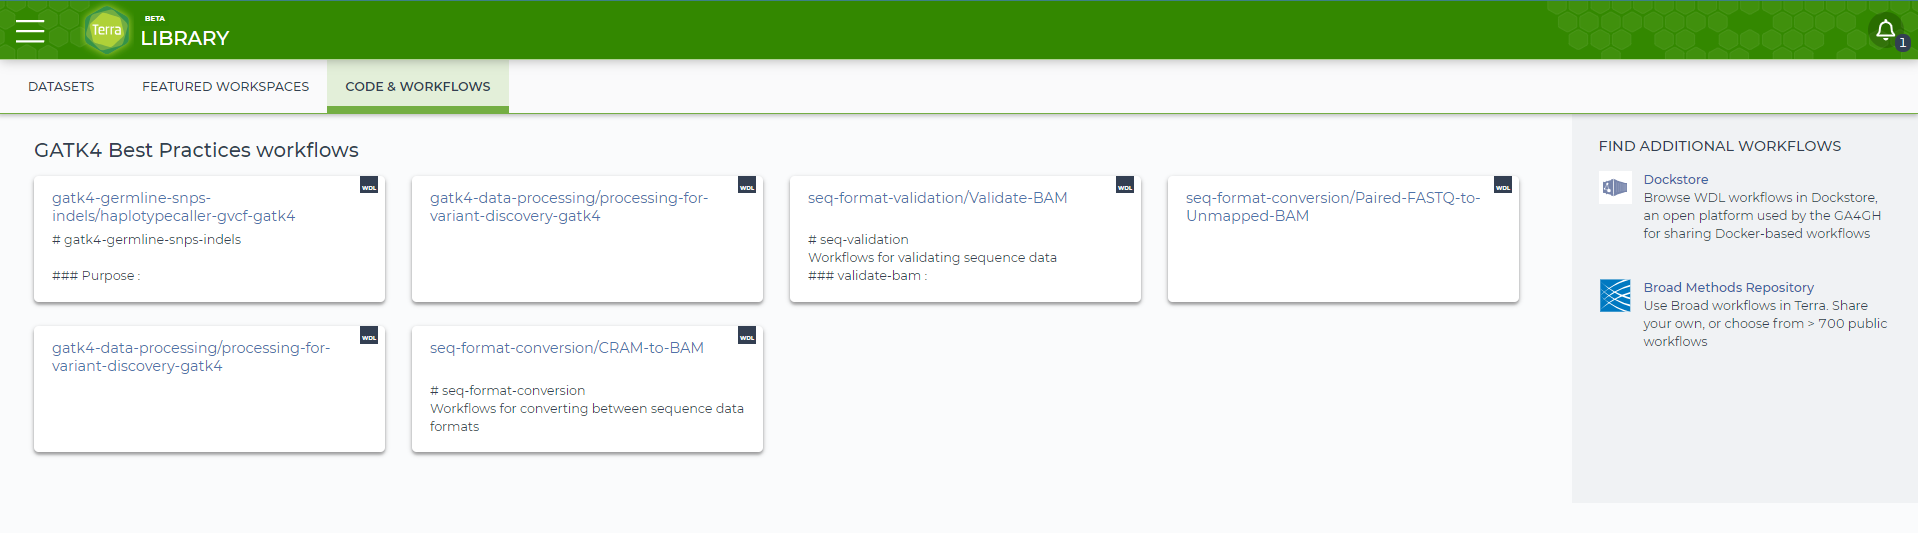 Screenshot of the code and workflows library with several GATK Best practices workflow cards in the main section and an option to find additional workflows from dockstore and the Broad Methods repository in a card on the right.